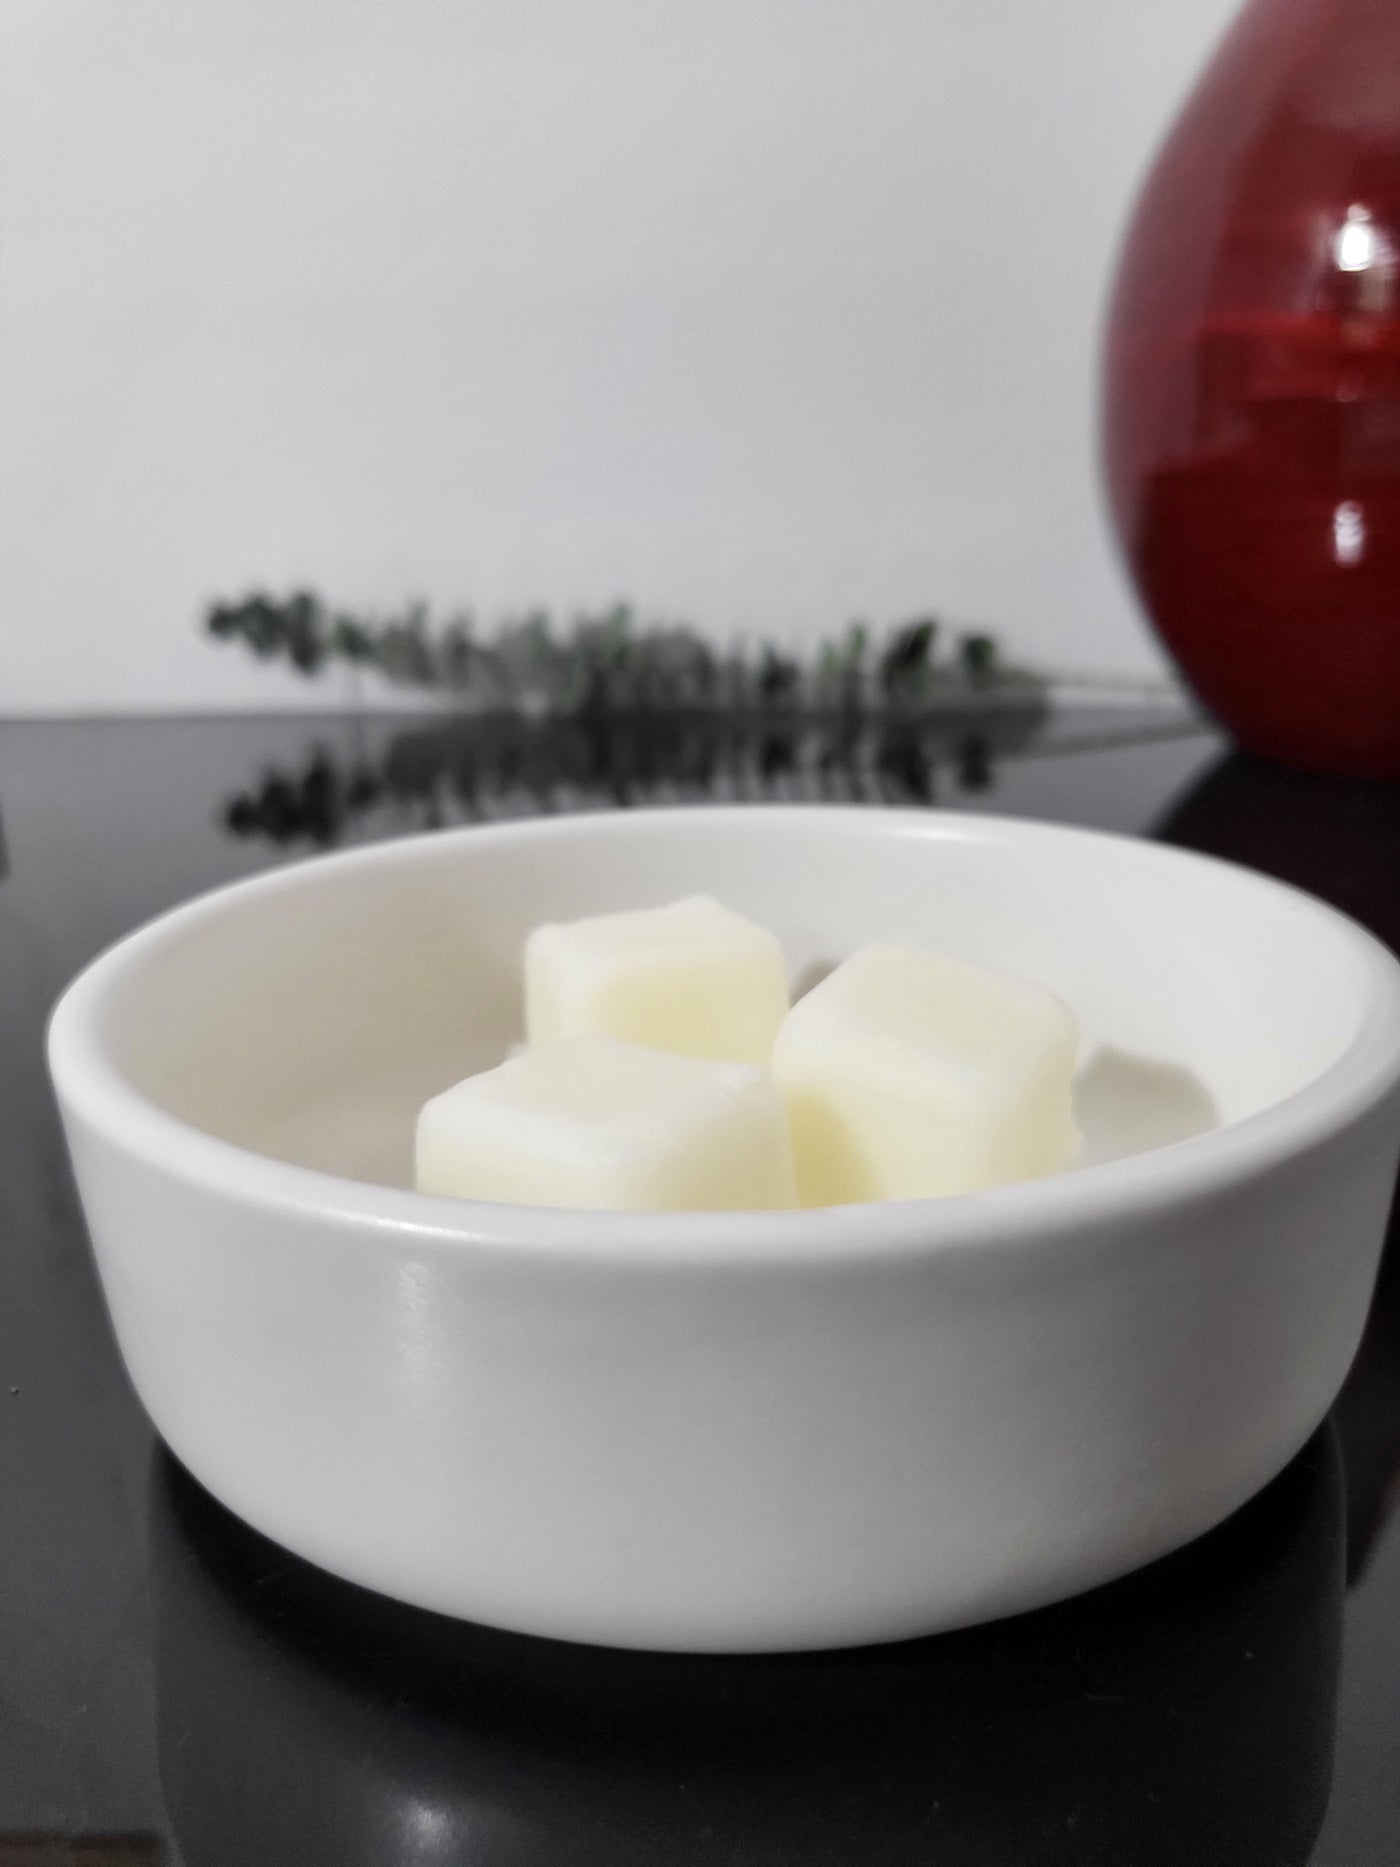 Luxury Scented Wax Melt DIY Kit by Ion Candle Co. – Íon Candle Co.